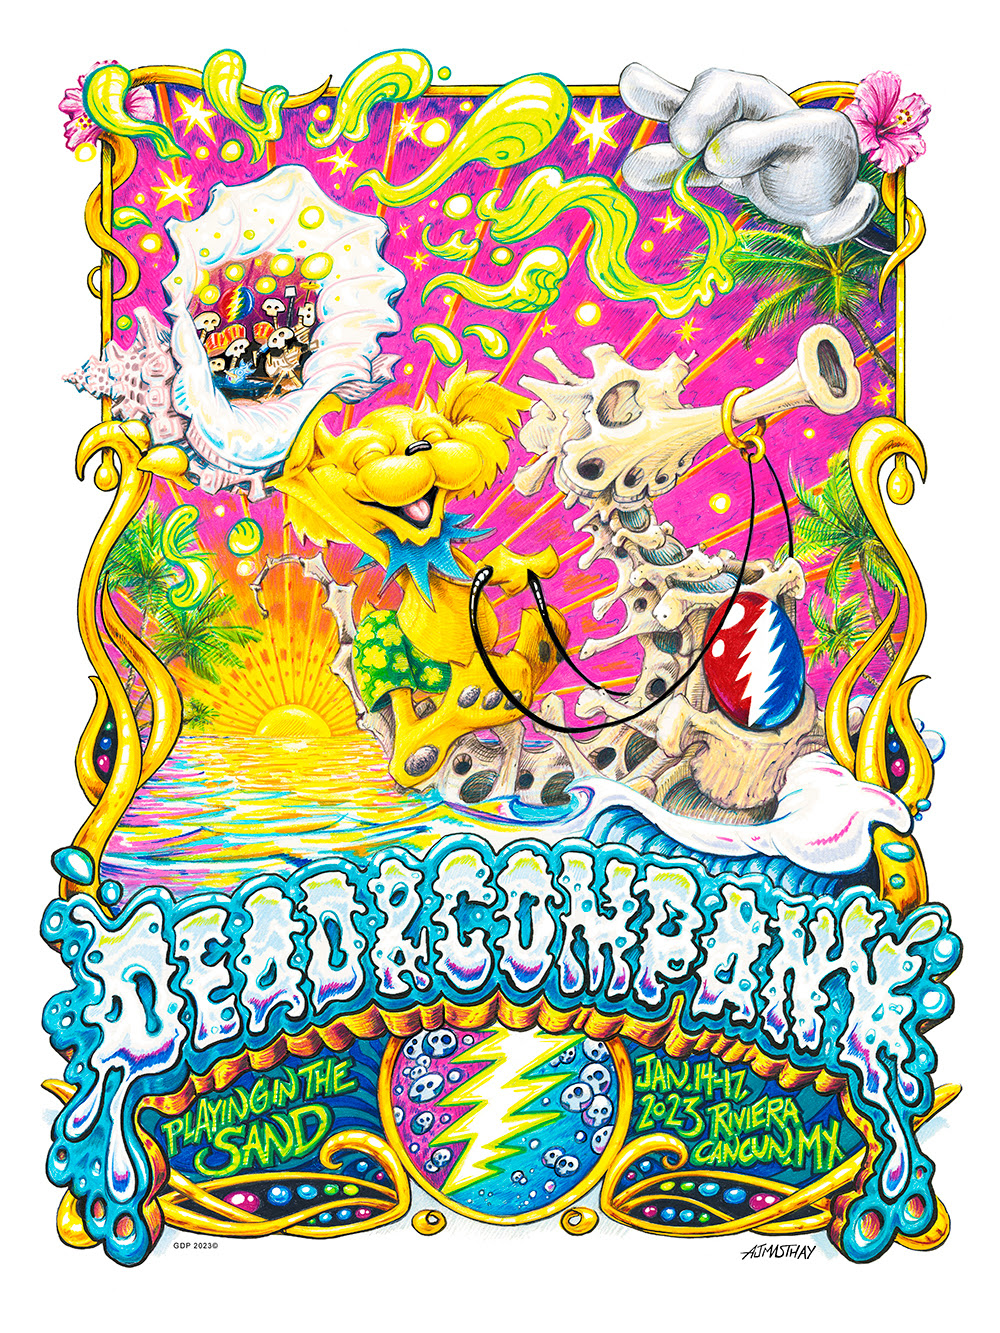 Dead & Company - Playing in the Sand